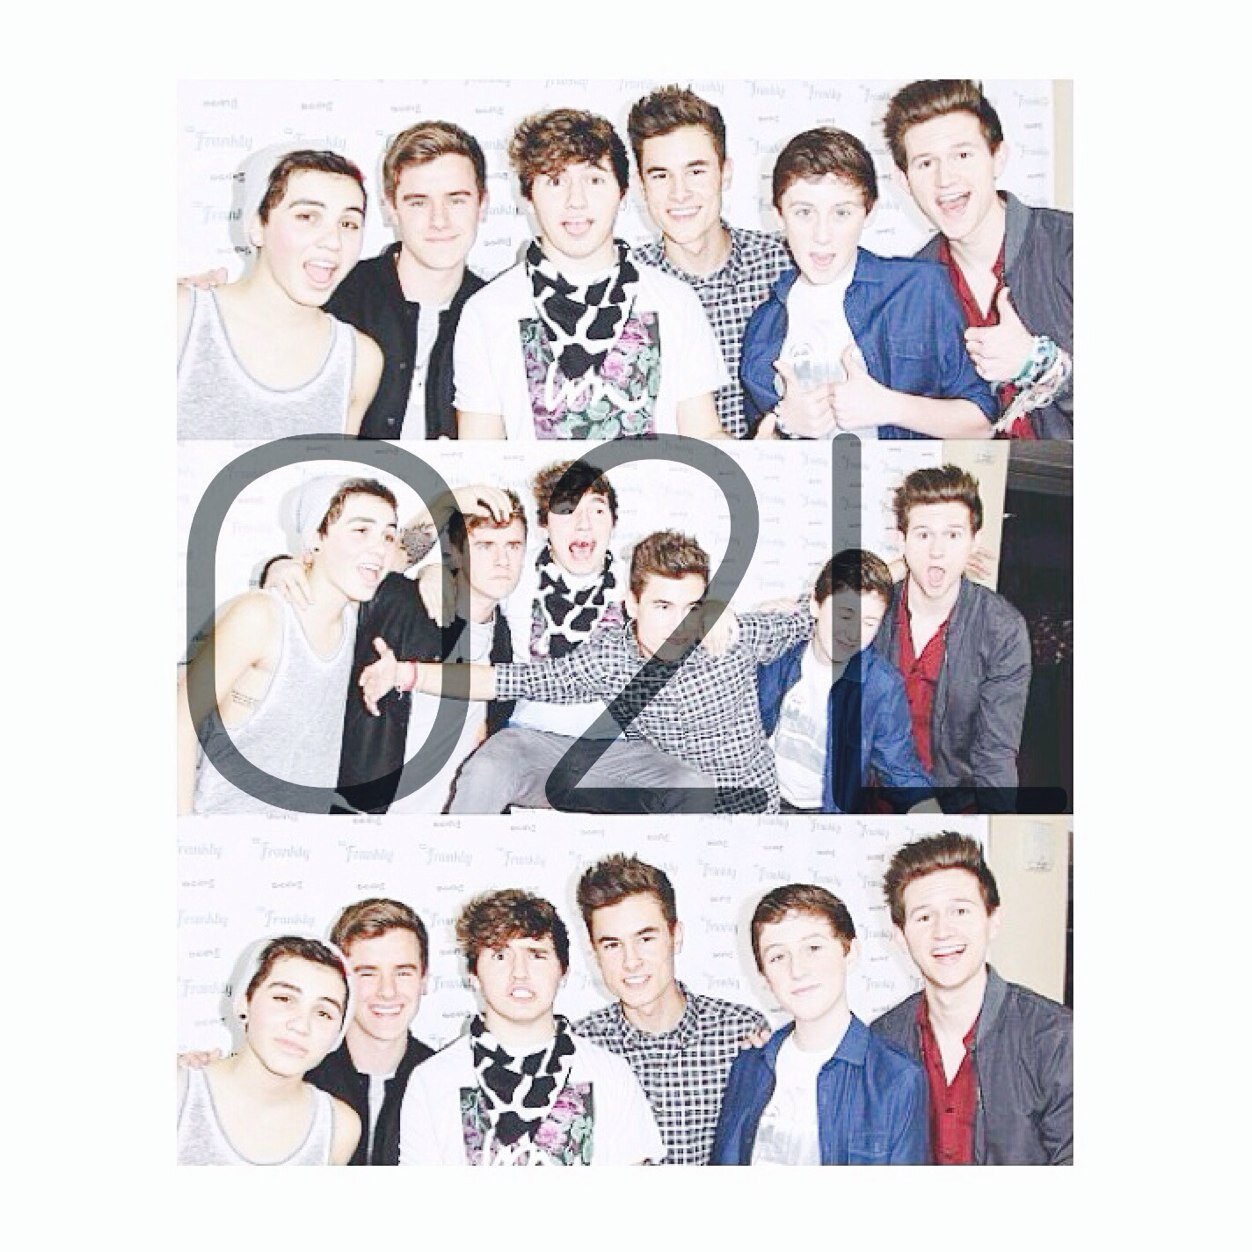 ~O2L obsessed~ #wesupportyouconnor